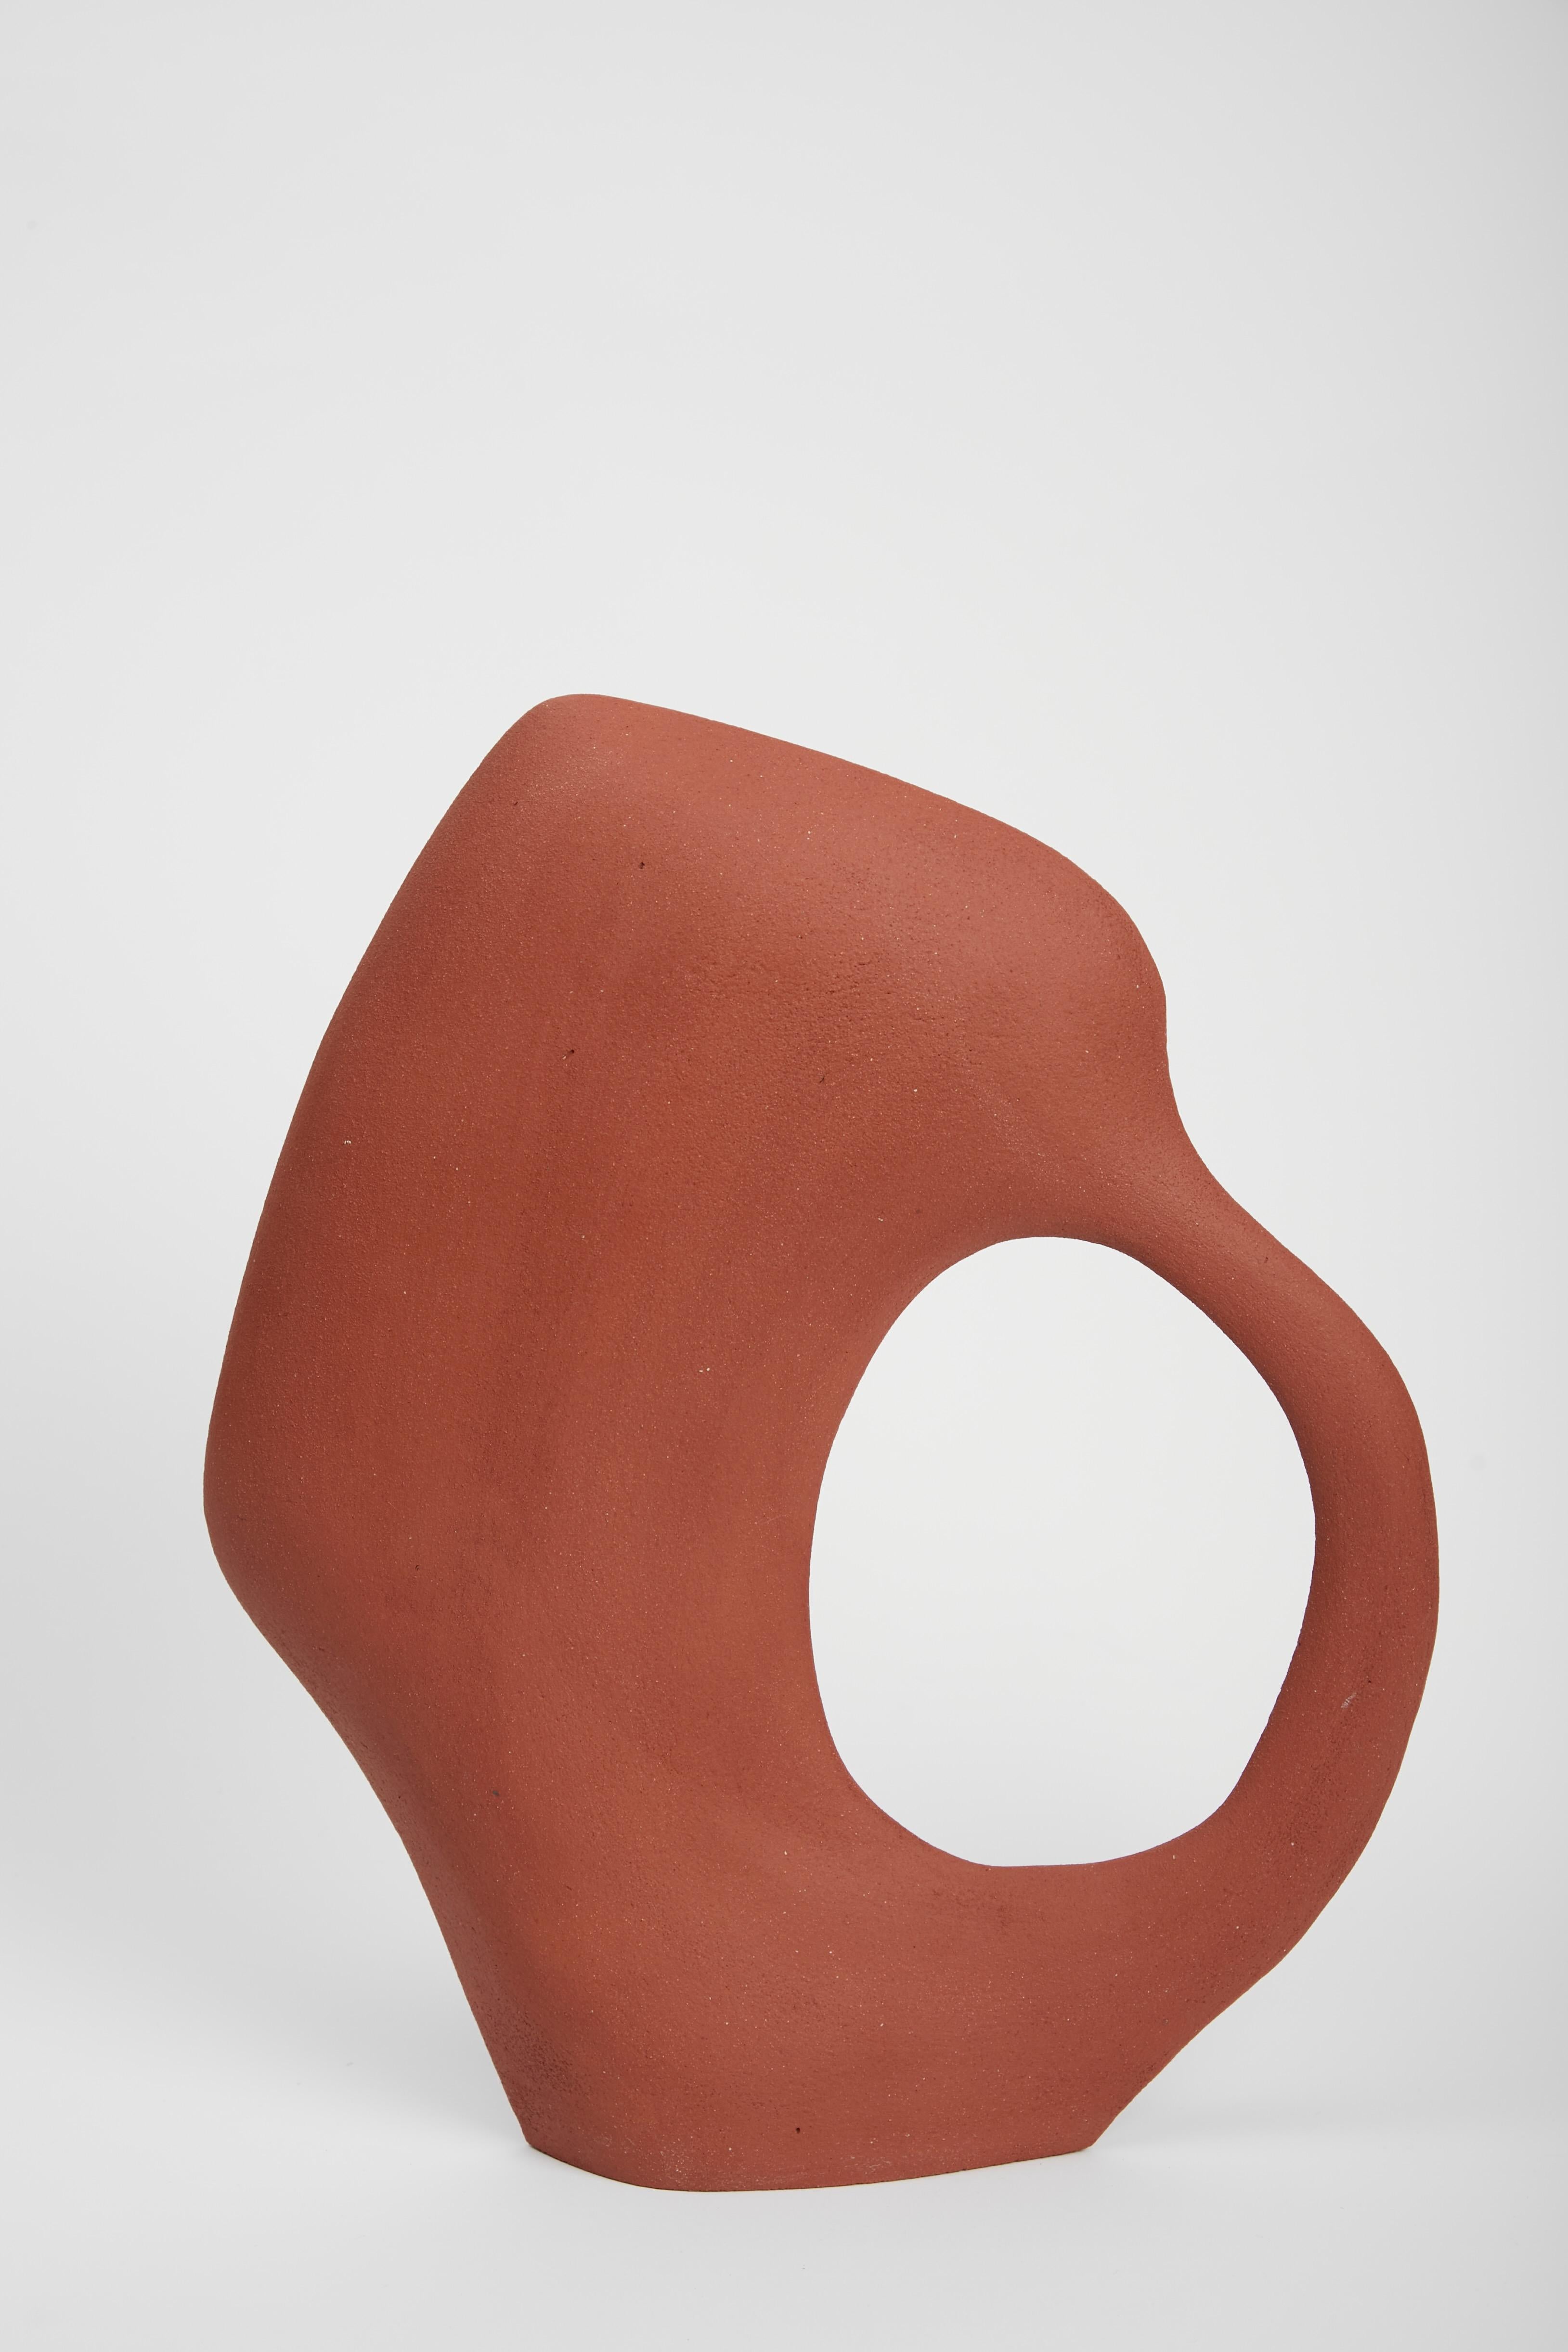 Susan Tribu 33.22 sculpture by Léontine Furcy
Unique piece.
Materials: Raw red sandstone.
Dimensions: L 30 x H 35 cm.

Léontine Furcy, ceramic artist, tells about herself in shapes, textures, curves, asymmetries, purifications. Each of the